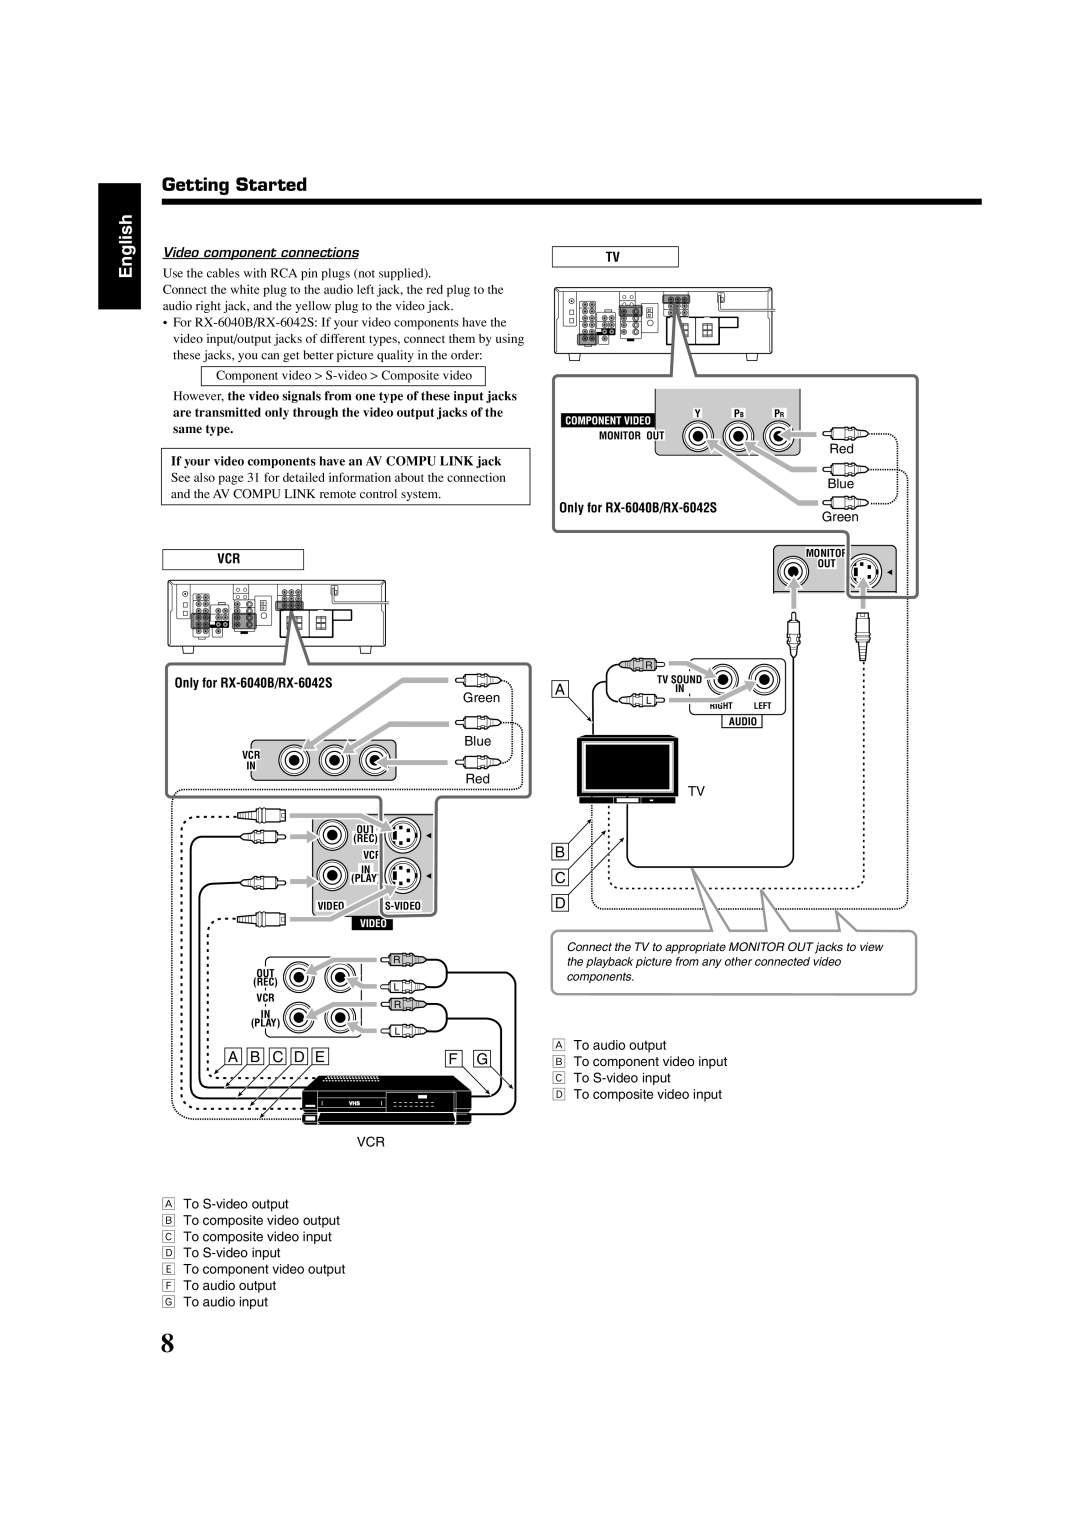 JVC RX-6042S, RX-6040B, RX-5040B manual English, Getting Started, A B C D E, Video component connections 